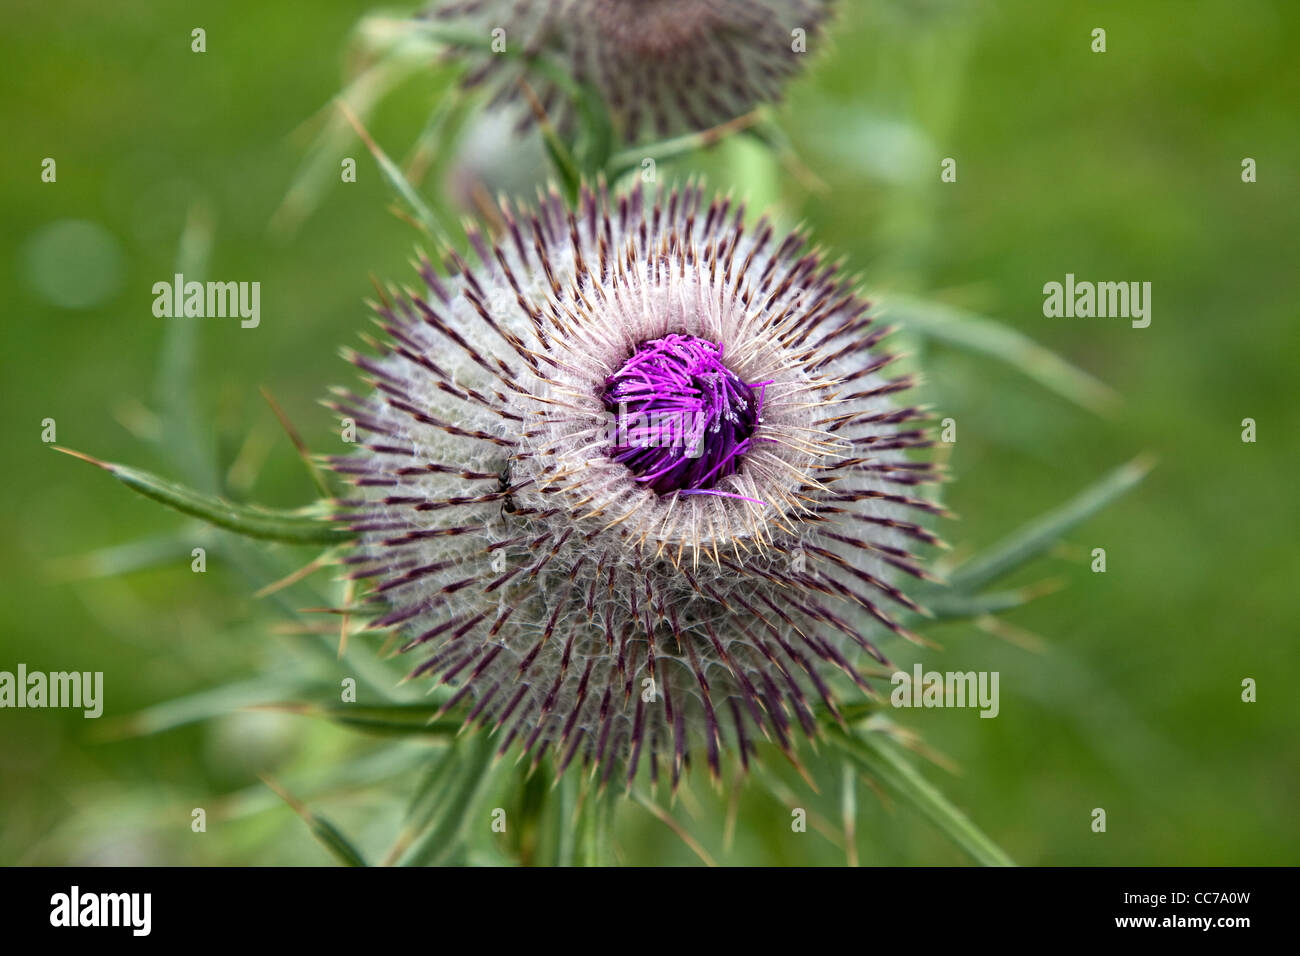 Close up view of a Thistle head. Stock Photo